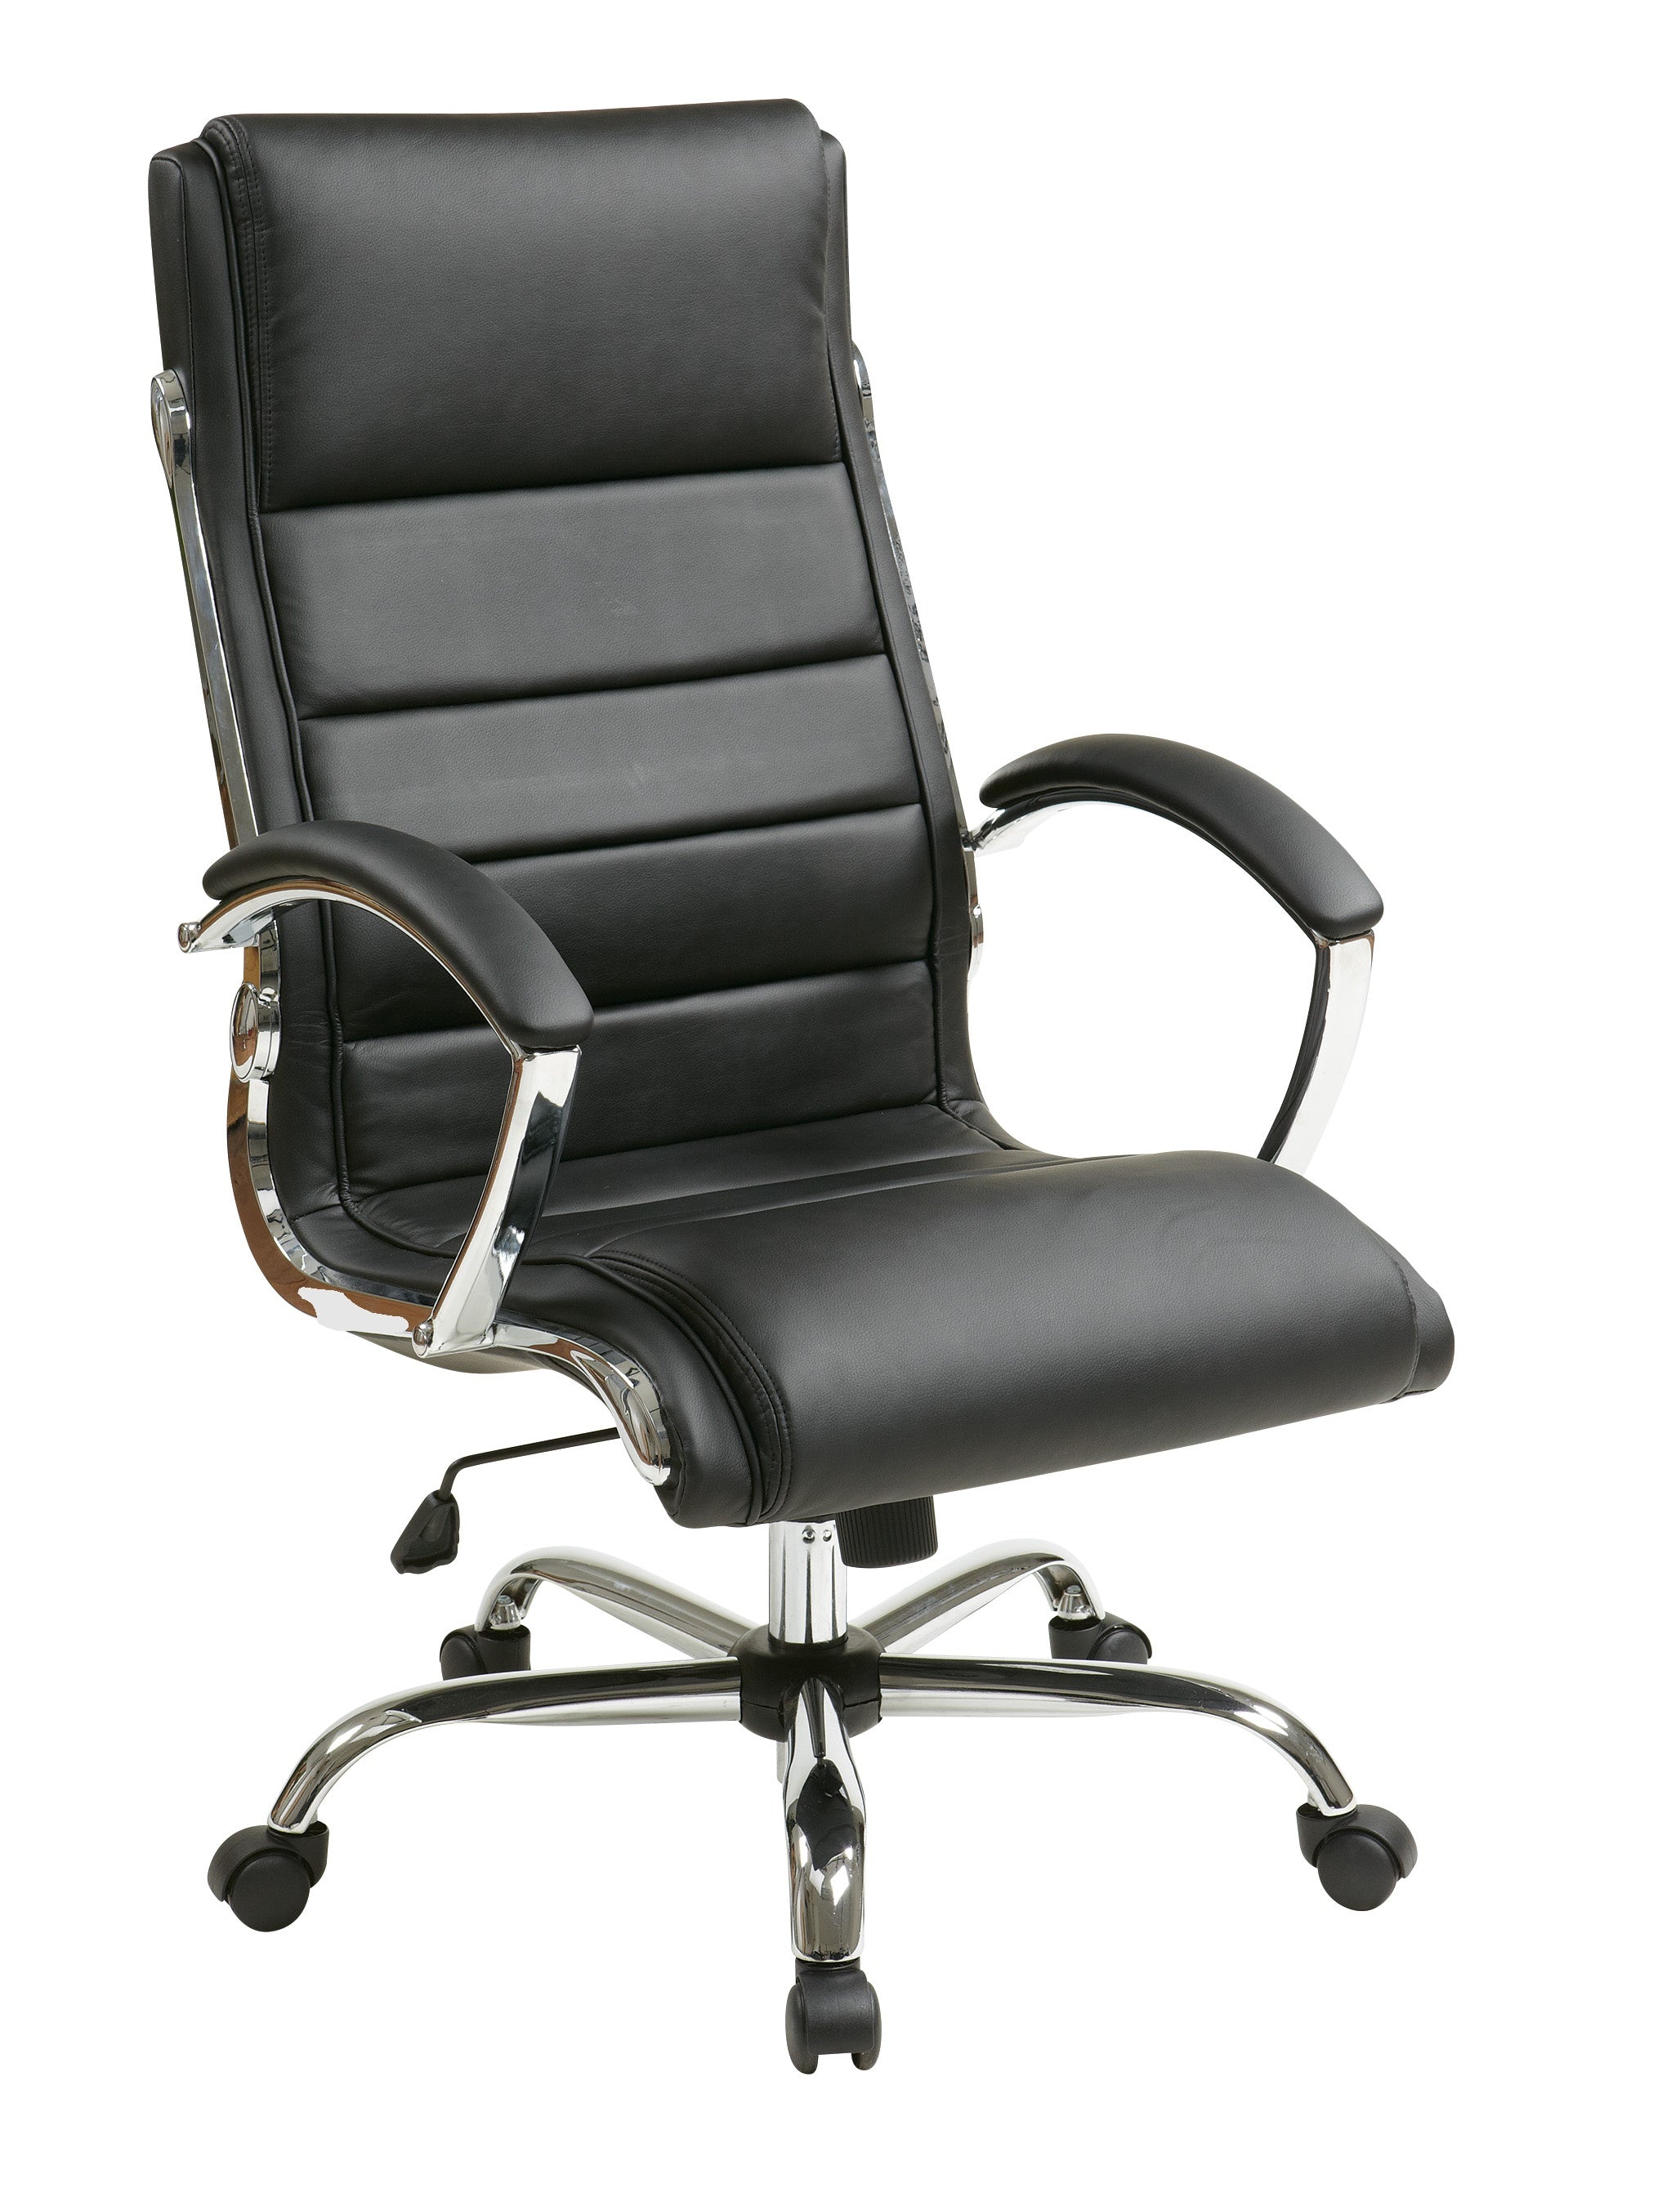 FL1327C - Padded High Back Faux Leather Chair by Office Star